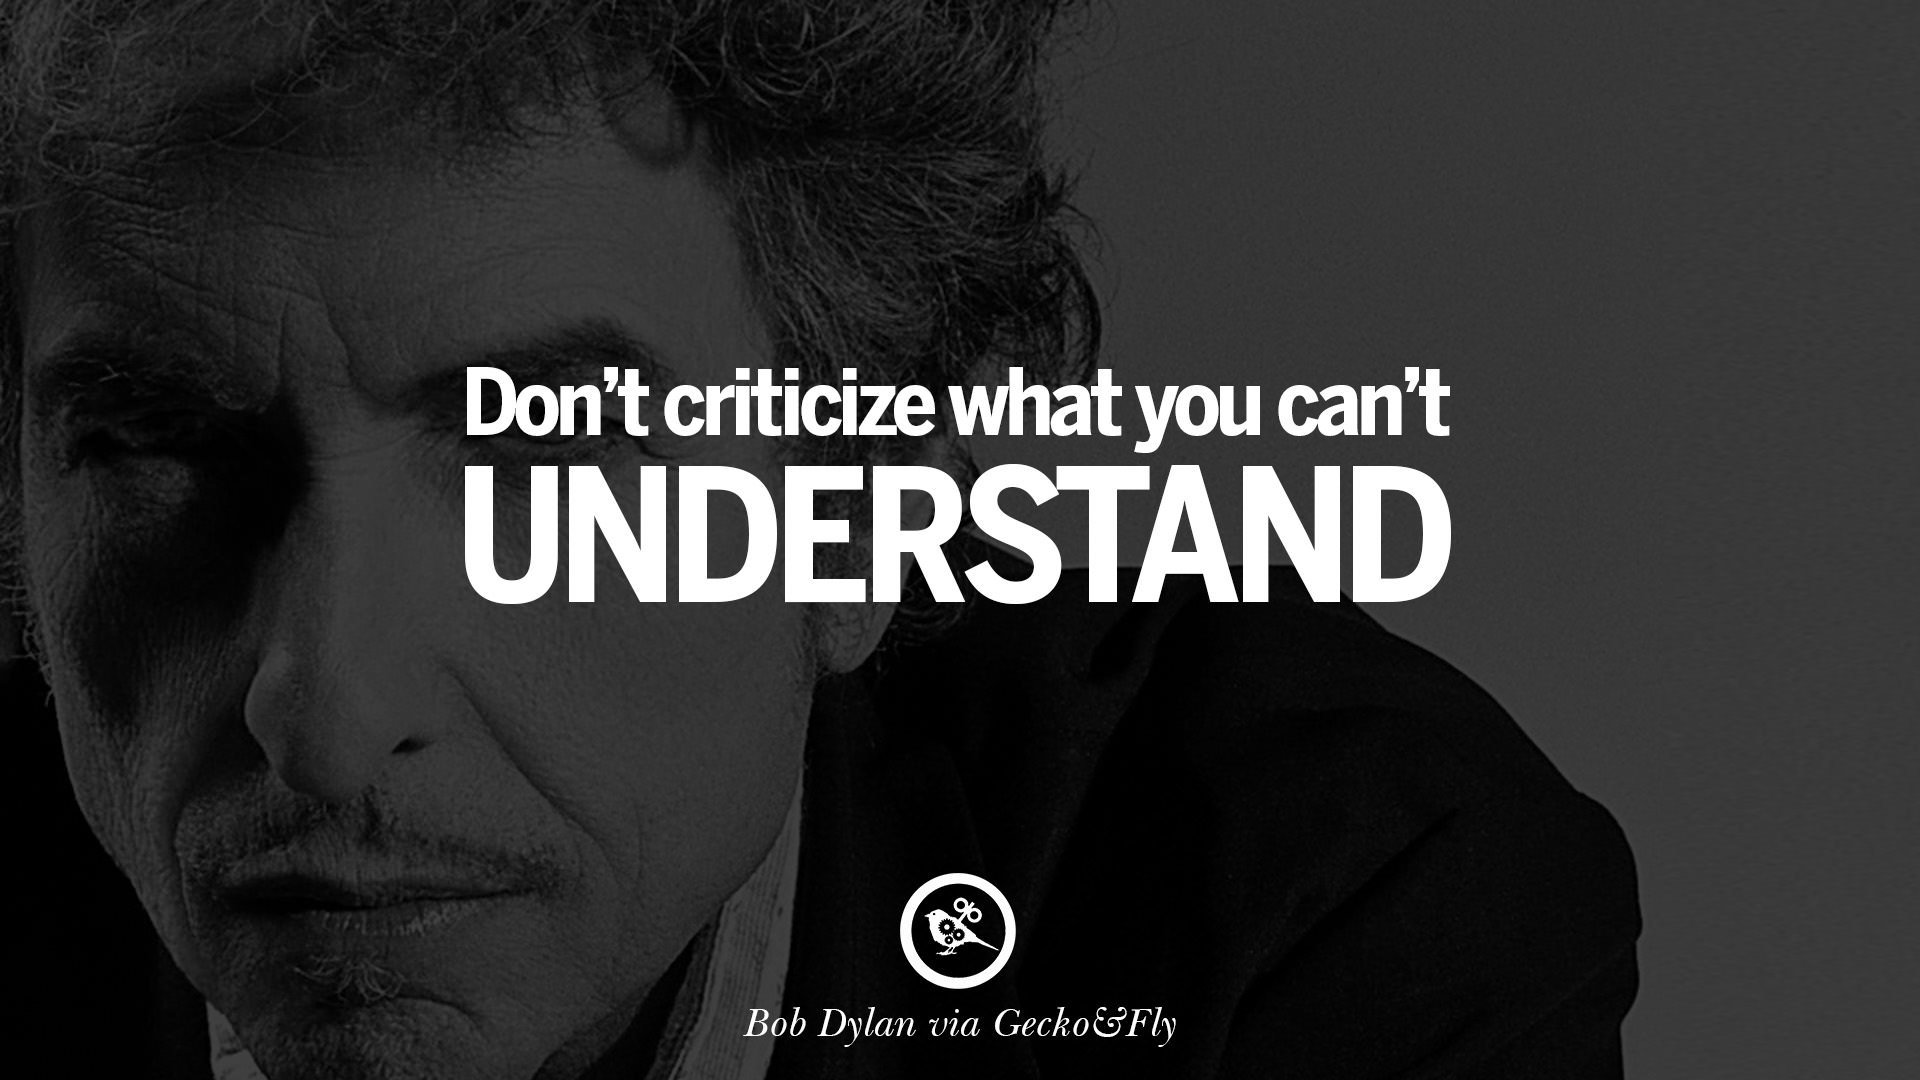 27 Inspirational Bob Dylan Quotes on Freedom, Love via His Lyrics and Songs